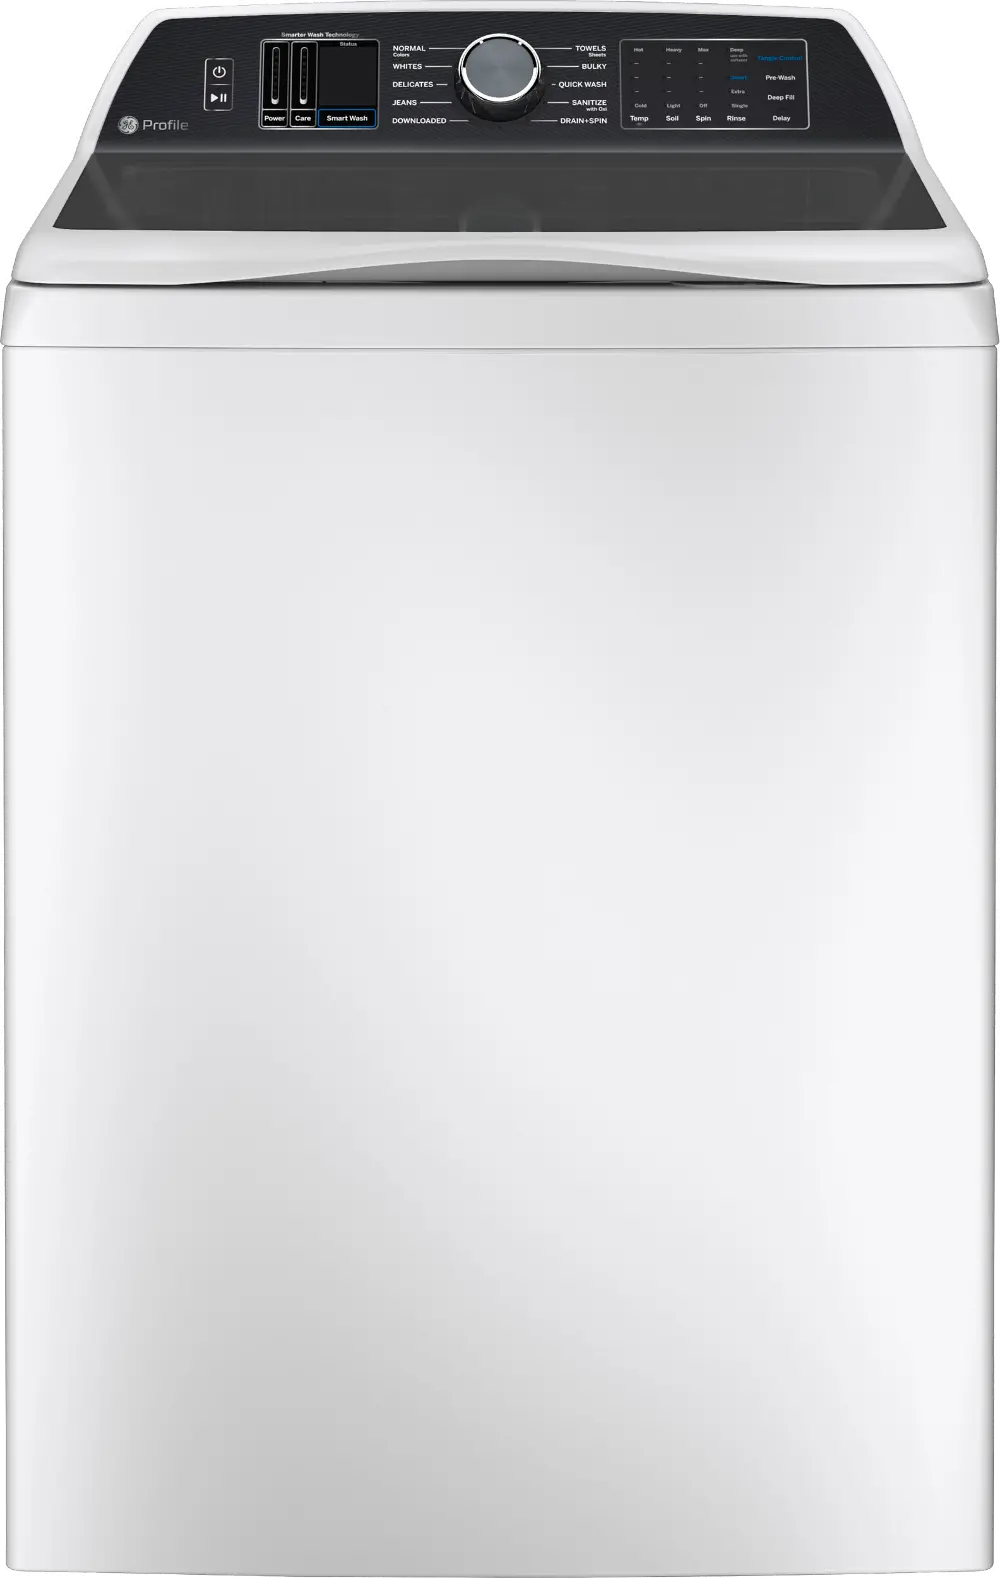 PTW700BSTWS GE Profile Top Load Washer - White PT700BST-1